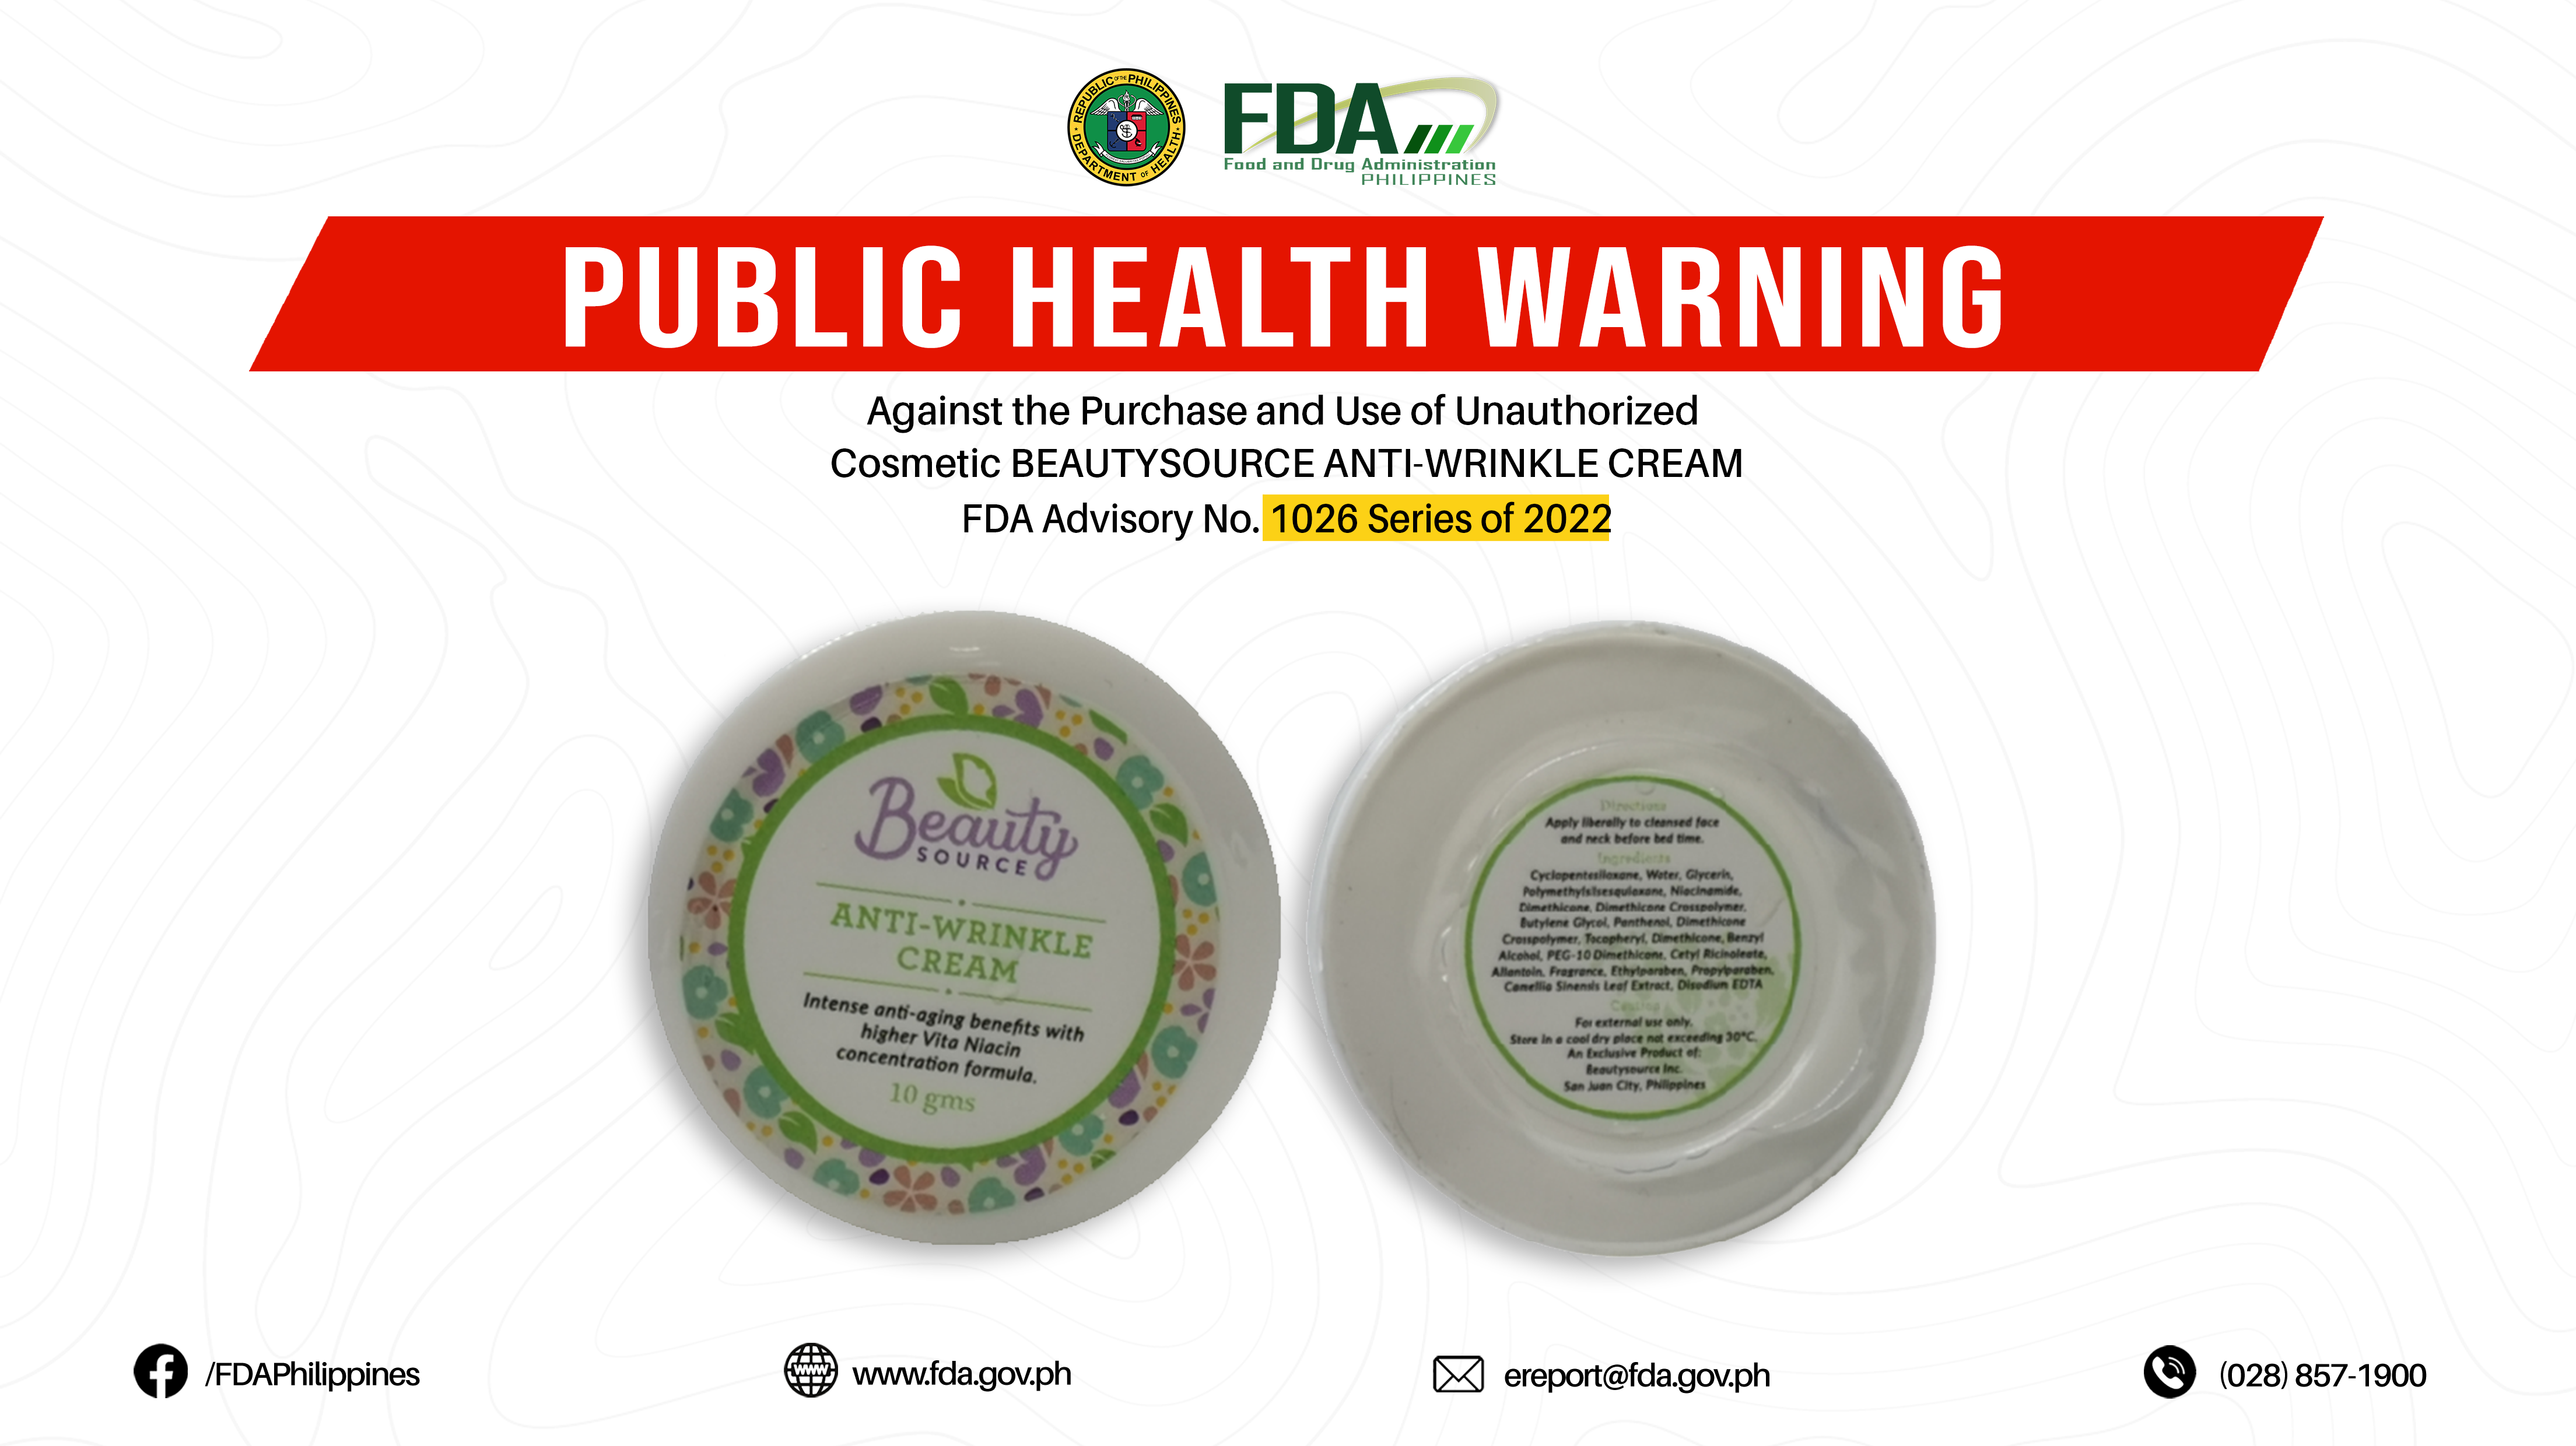 FDA Advisory No.2022-1026 || Public Health Warning Against the Purchase and Use of Unauthorized Cosmetic BEAUTYSOURCE ANTI-WRINKLE CREAM